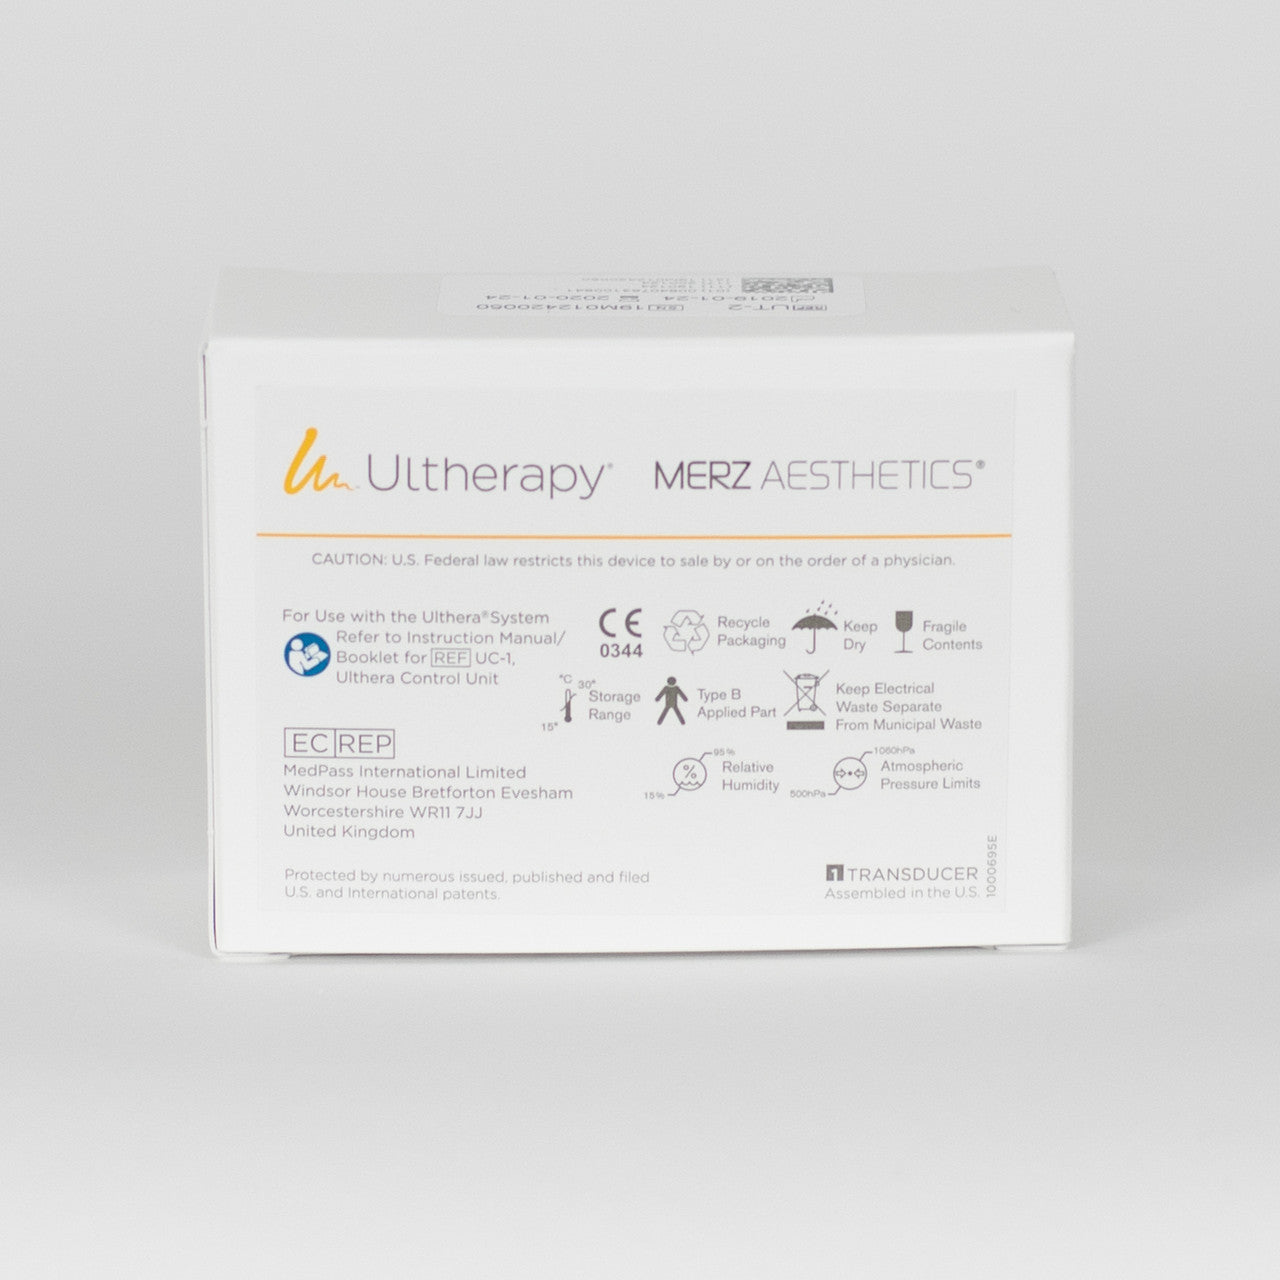 Ultherapy DeepSEE DS 7-3.0 N (Green) Transducer Box information